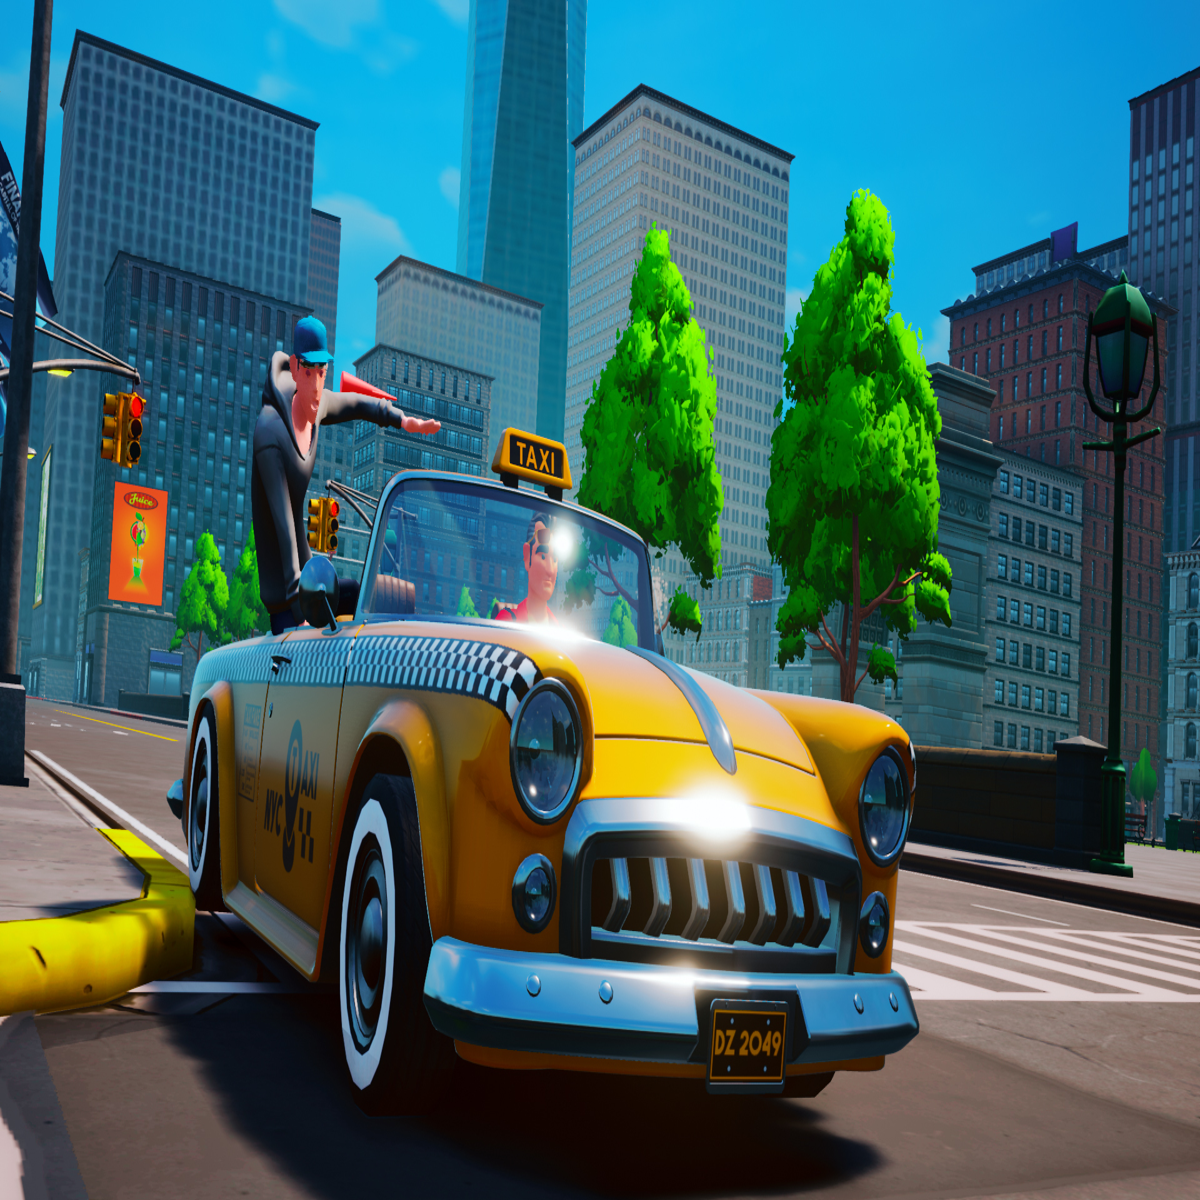 SEGA's Crazy Taxi Now Free for Limited Time, Crazy Taxi: City Rush Coming  This Year